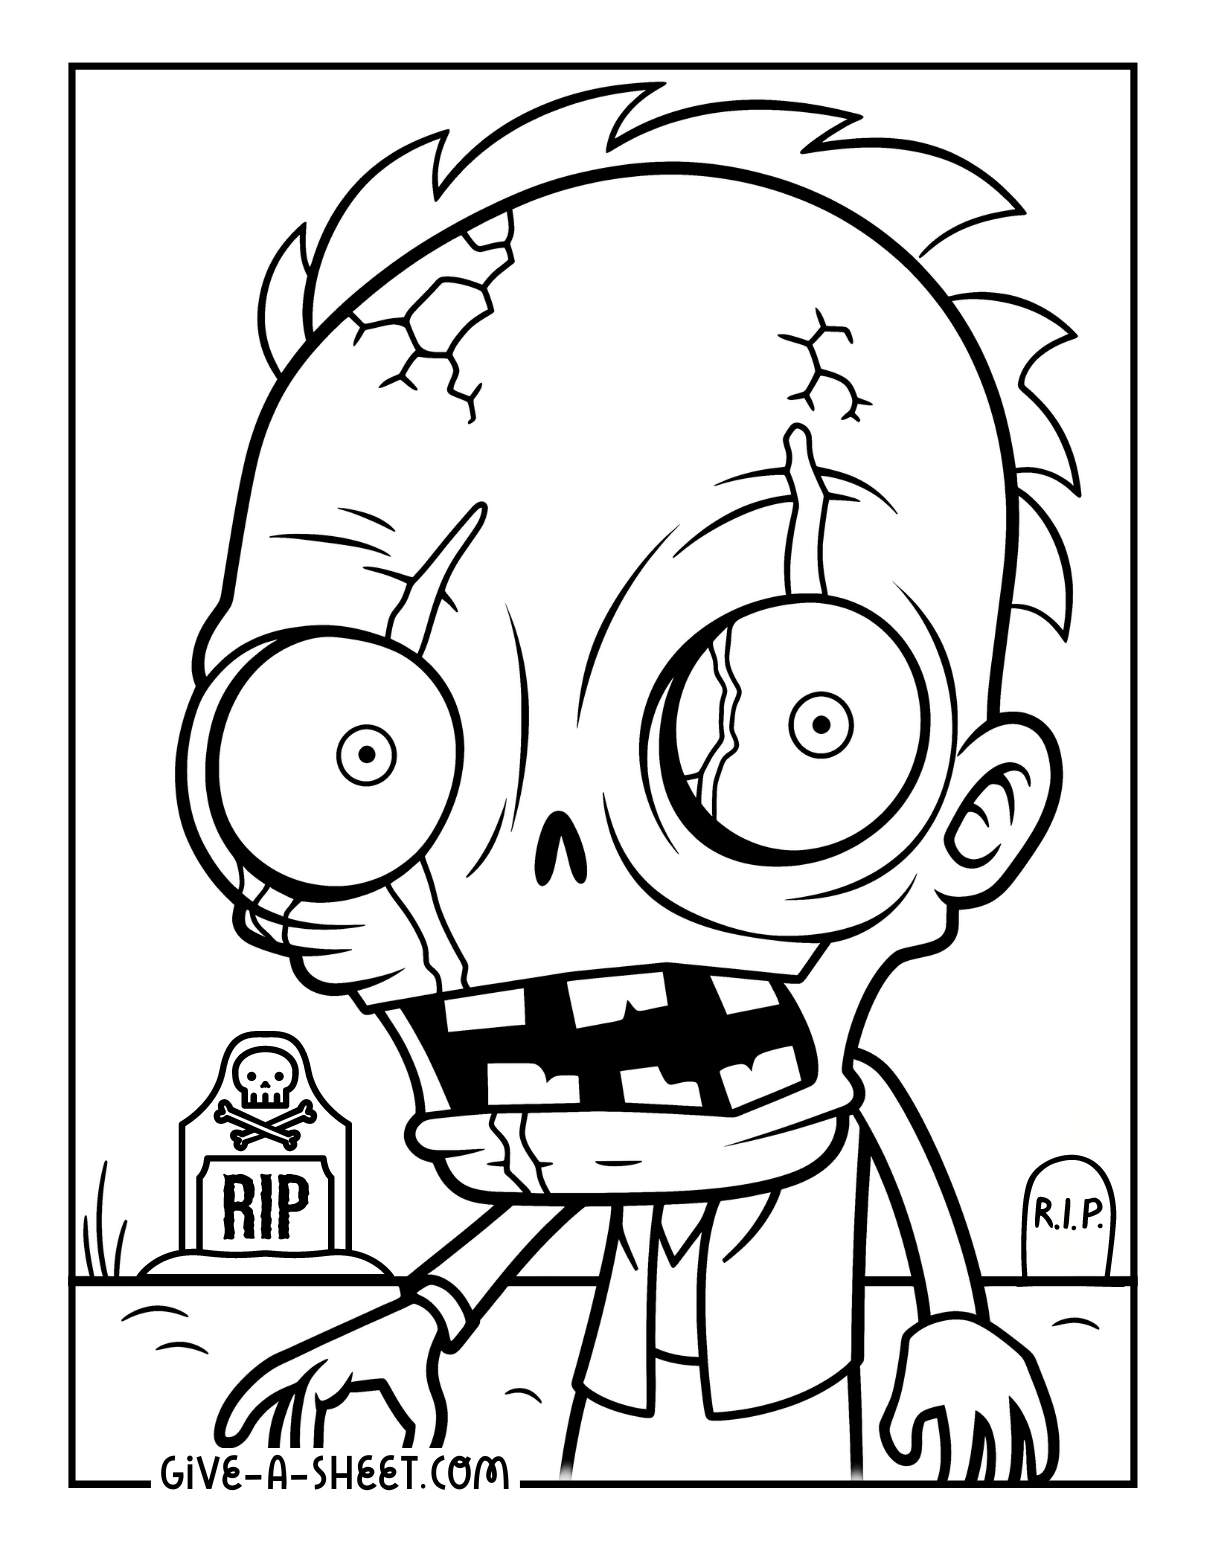 Creepy eye sockets zombie coloring page for adults.